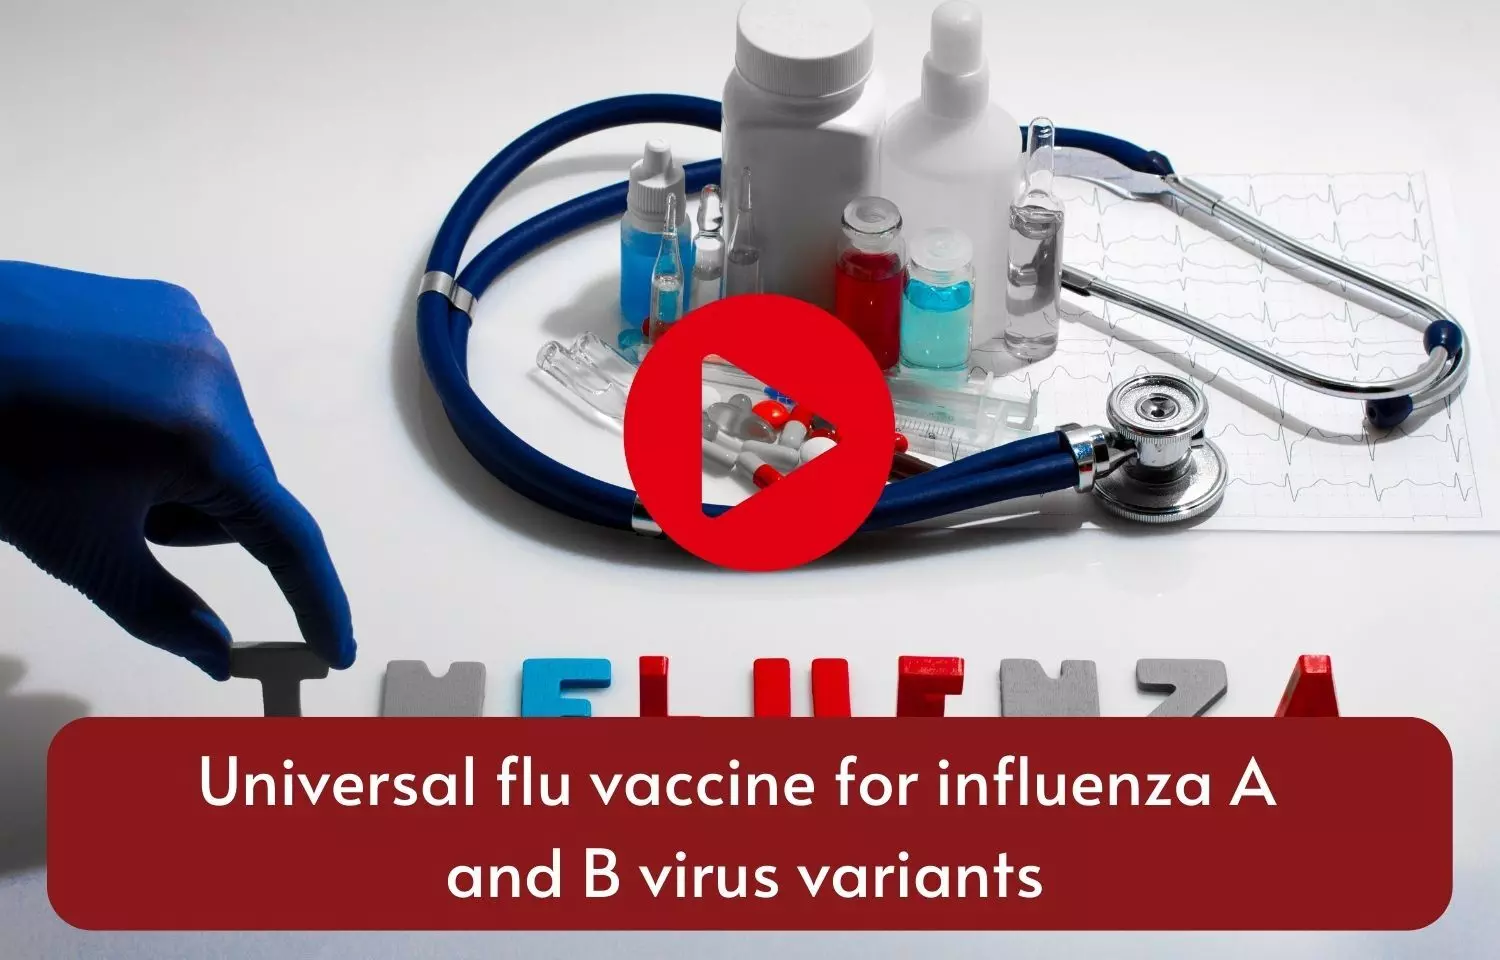 Universal flu vaccine for influenza A and B virus variants